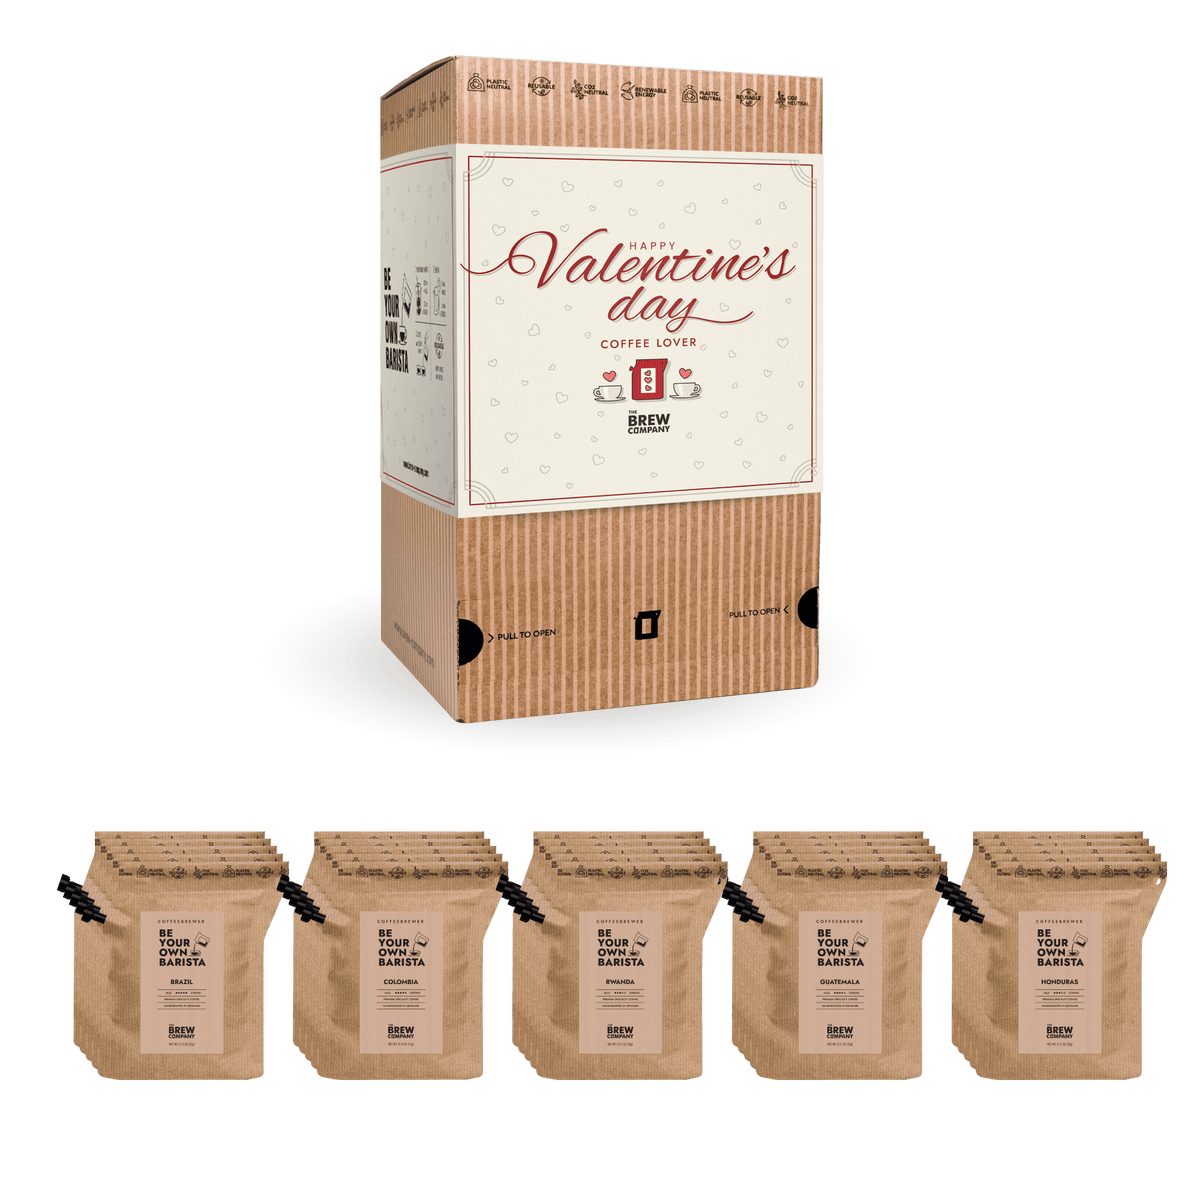 VALENTINE&#39;S DAY COFFEE GIFT BOX Gift Boxes The Brew Company